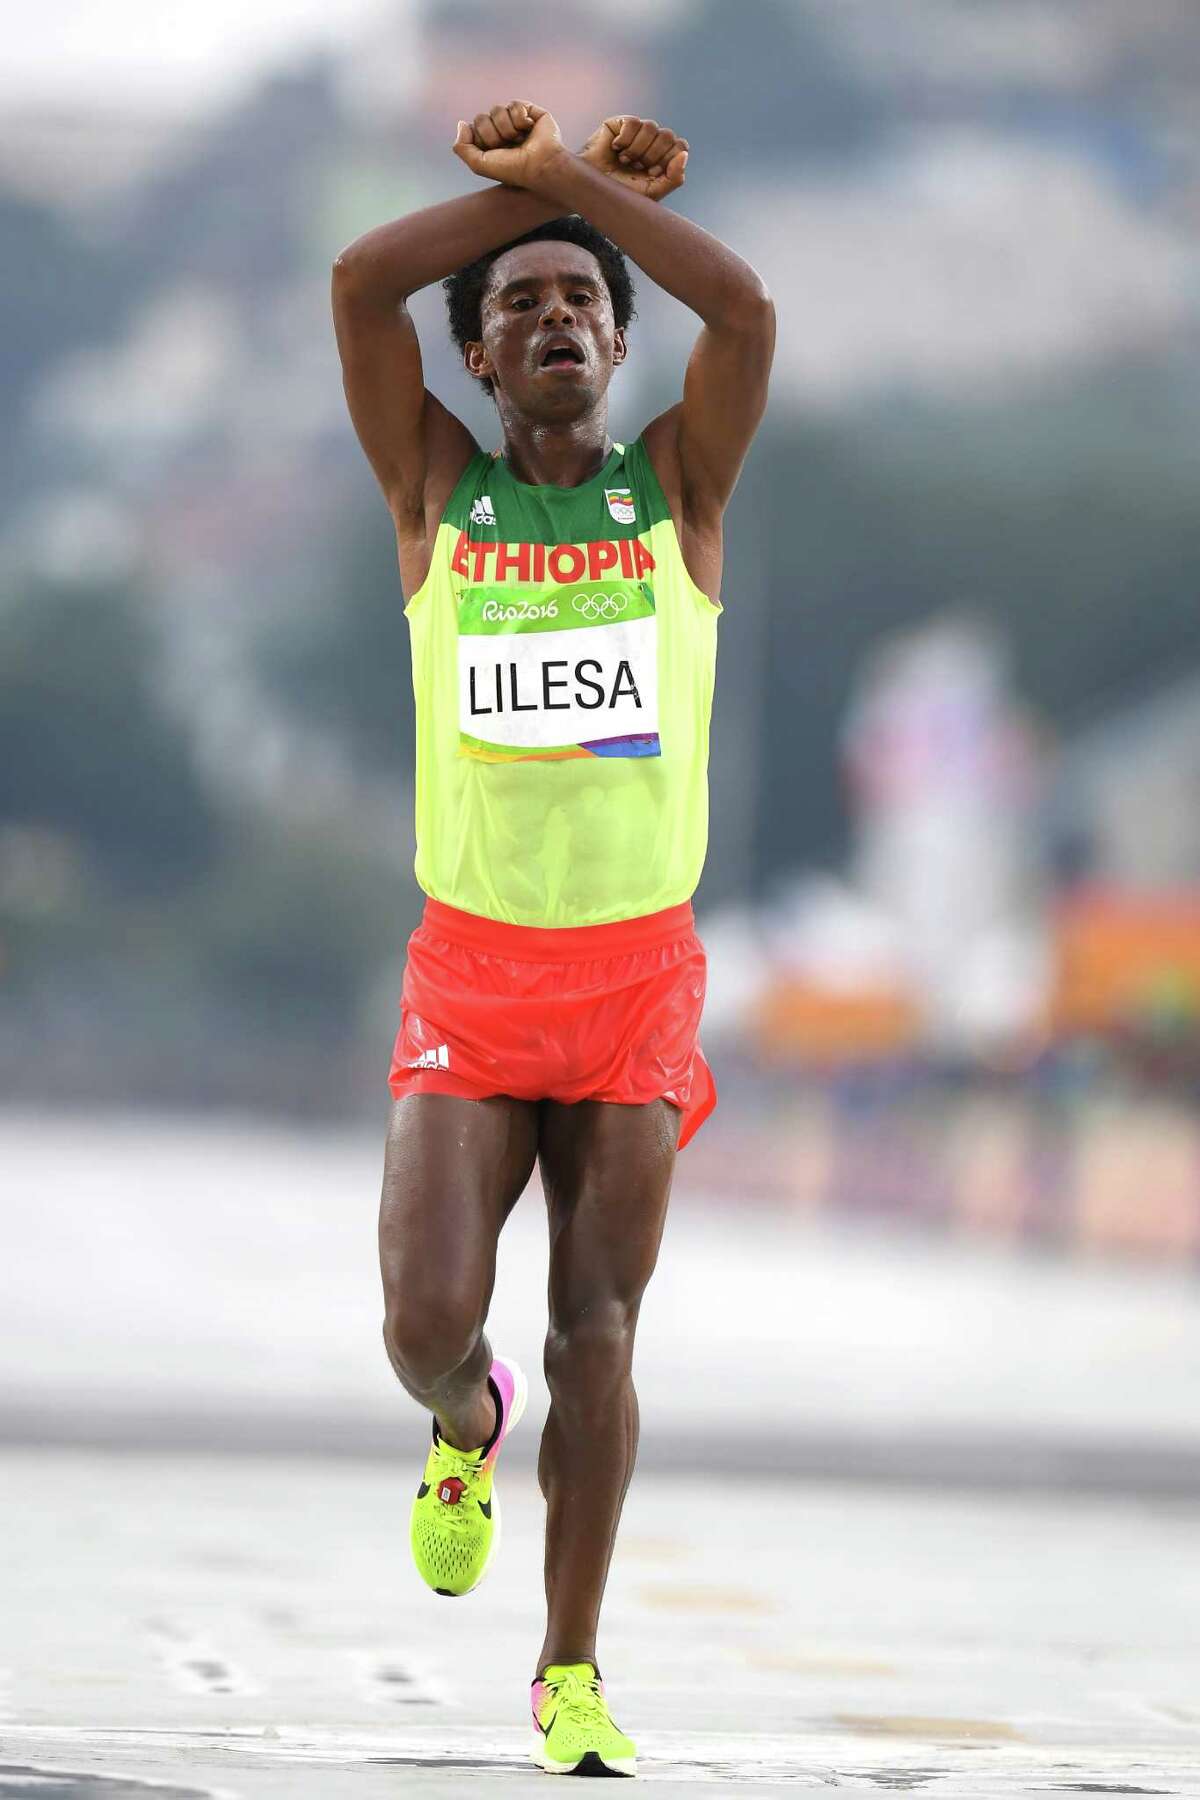 It was this sign while winning silver in the marathon at the Rio Olympics that got Feyisa Lilesa in hot water with the Ethiopian government.﻿